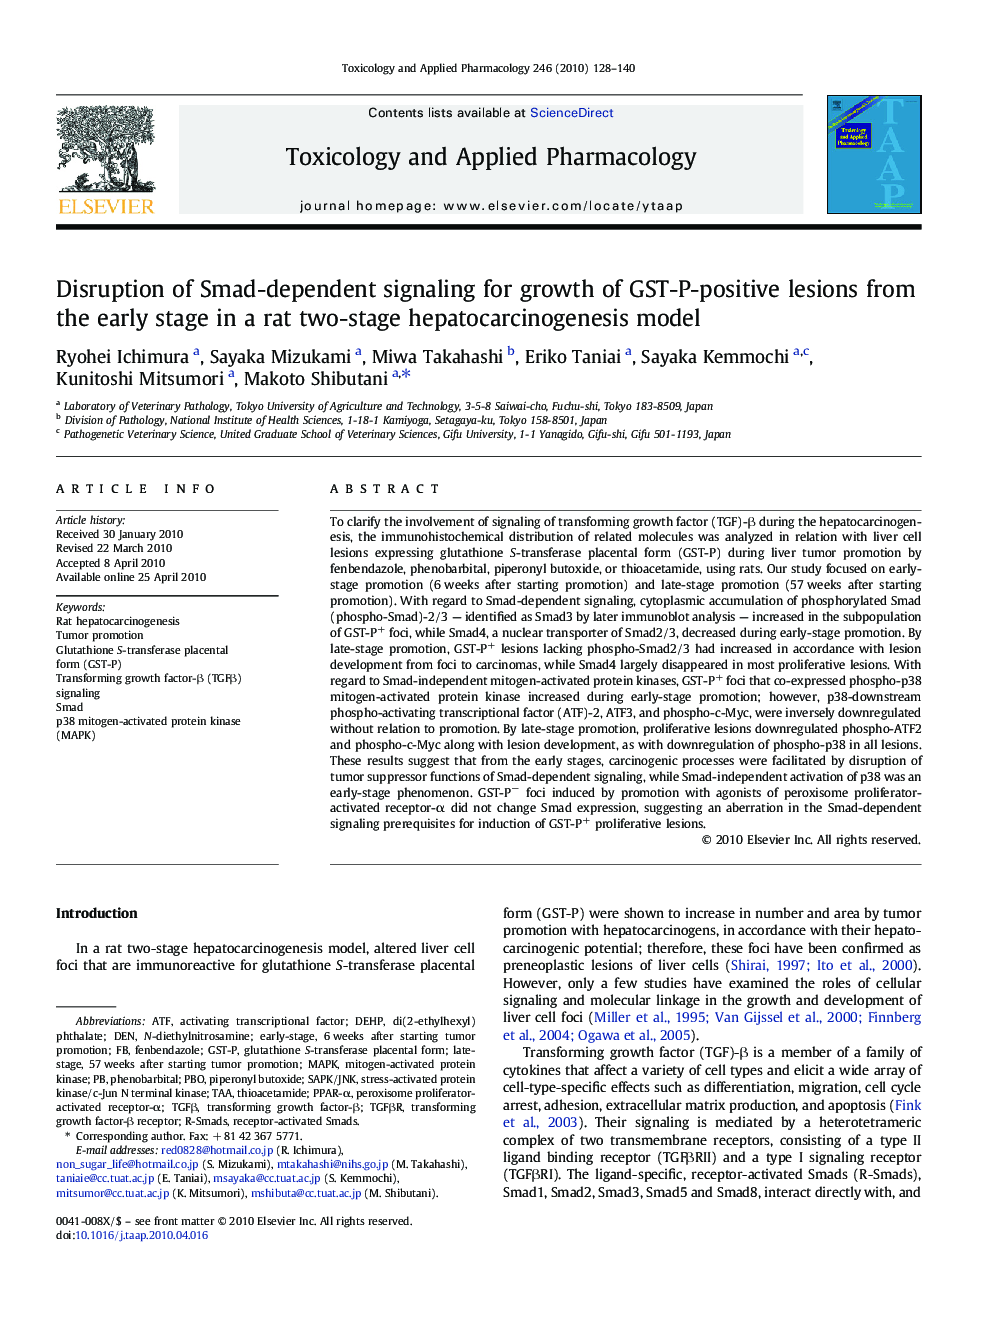 Disruption of Smad-dependent signaling for growth of GST-P-positive lesions from the early stage in a rat two-stage hepatocarcinogenesis model